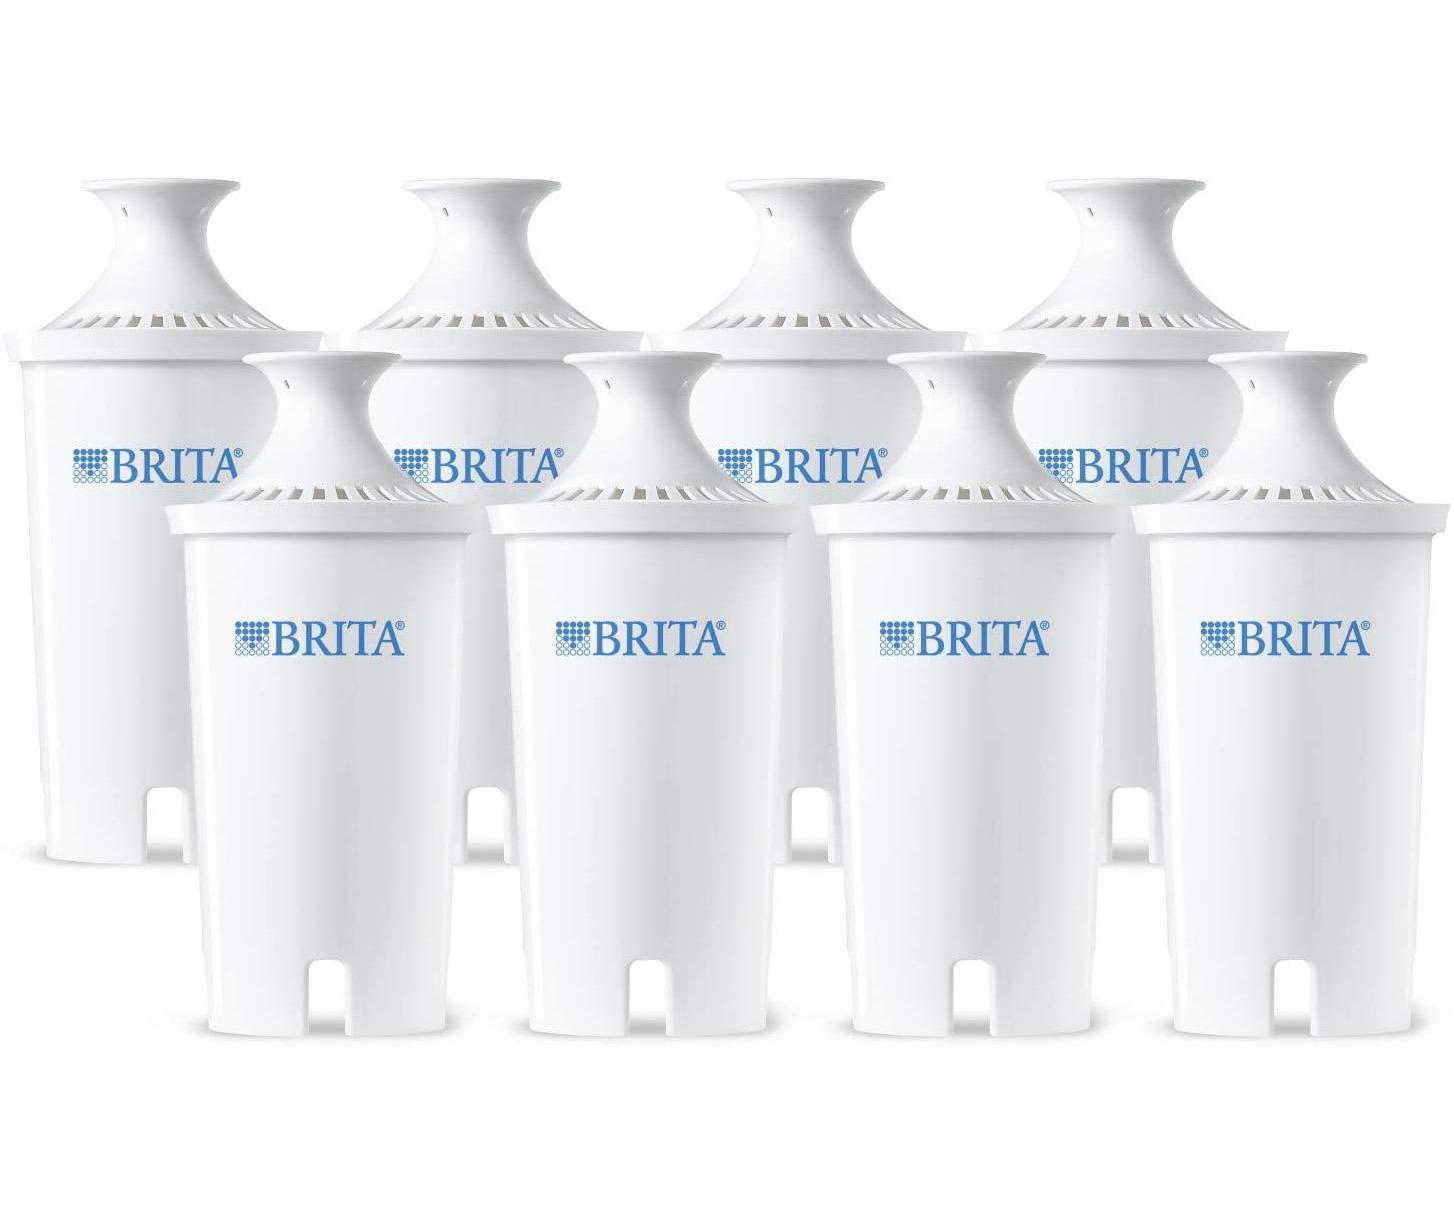 8 Brita Standard Replacement Filters for $25.88 Shipped